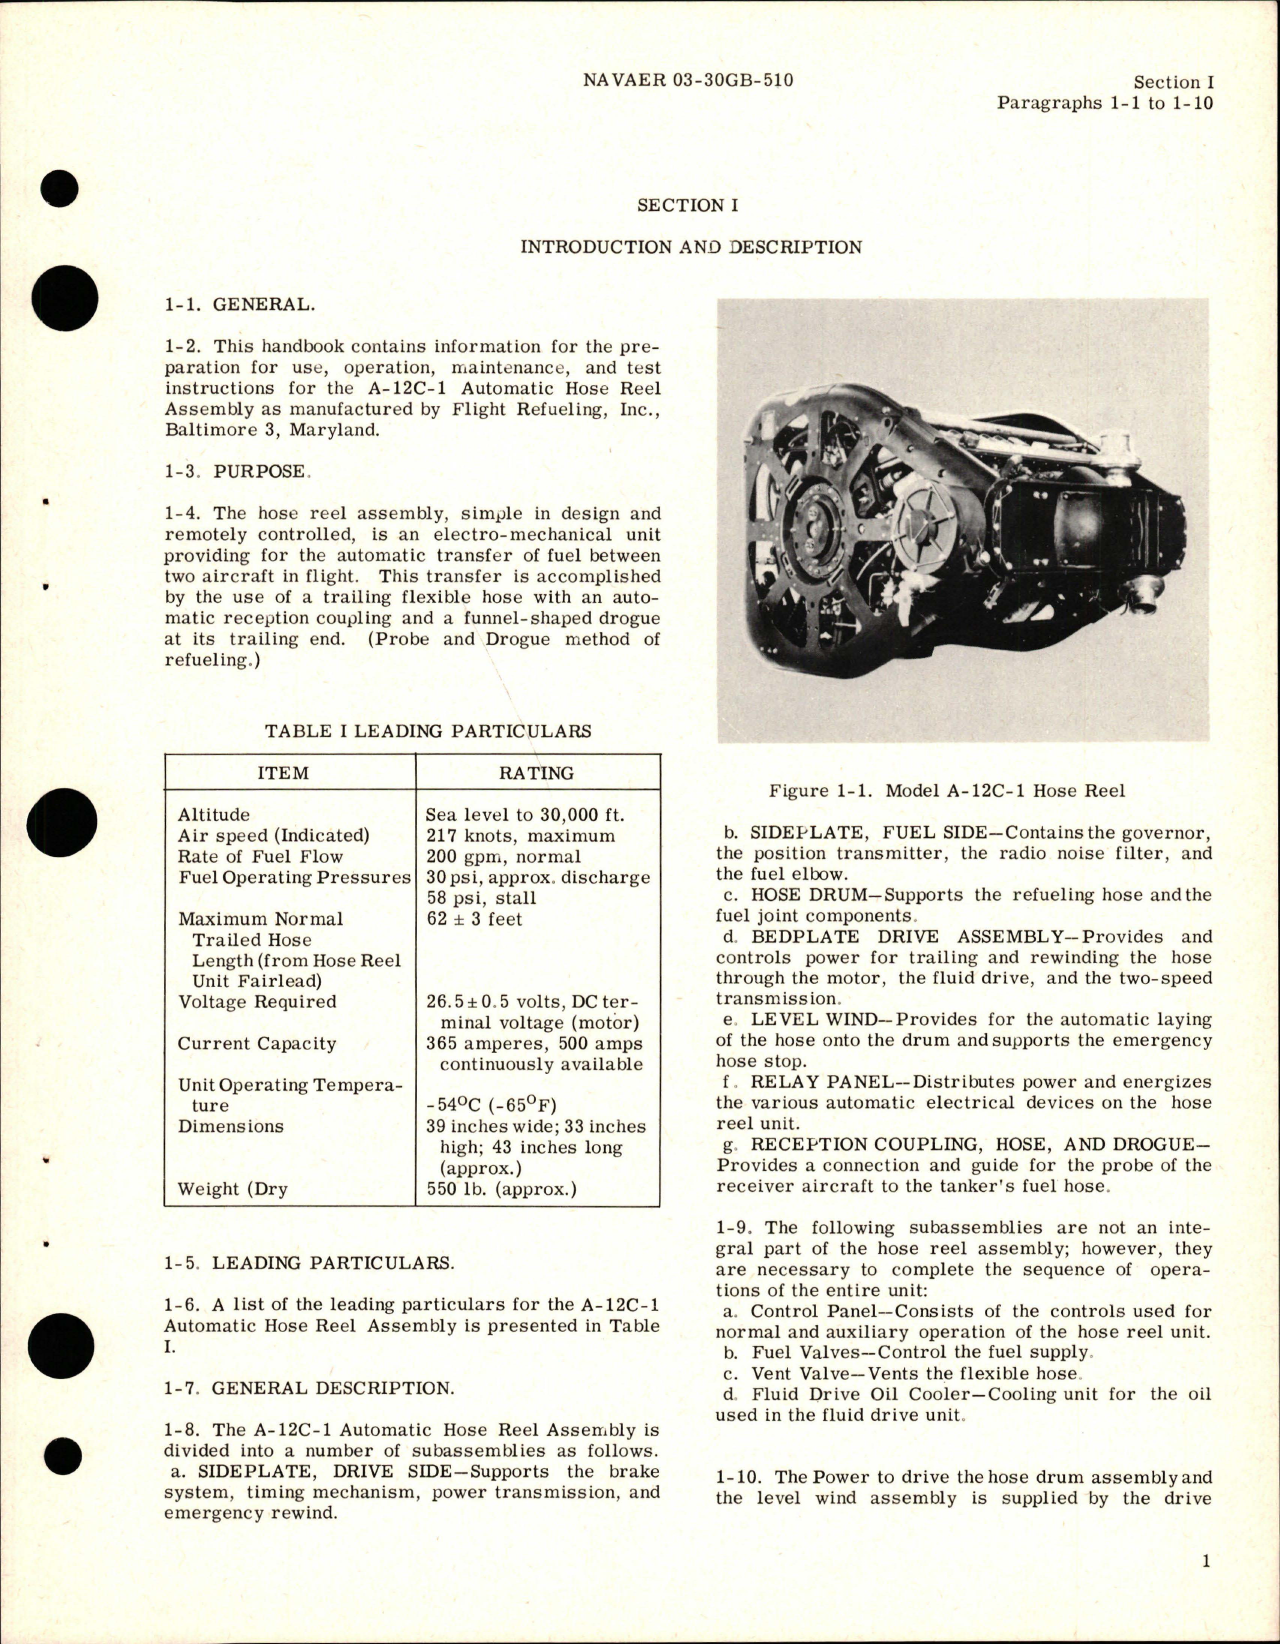 Sample page 7 from AirCorps Library document: Operation and Maintenance Instructions for Automatic Hose Reel Assembly - Models A-12C, A-12A-2, and A-12C-1